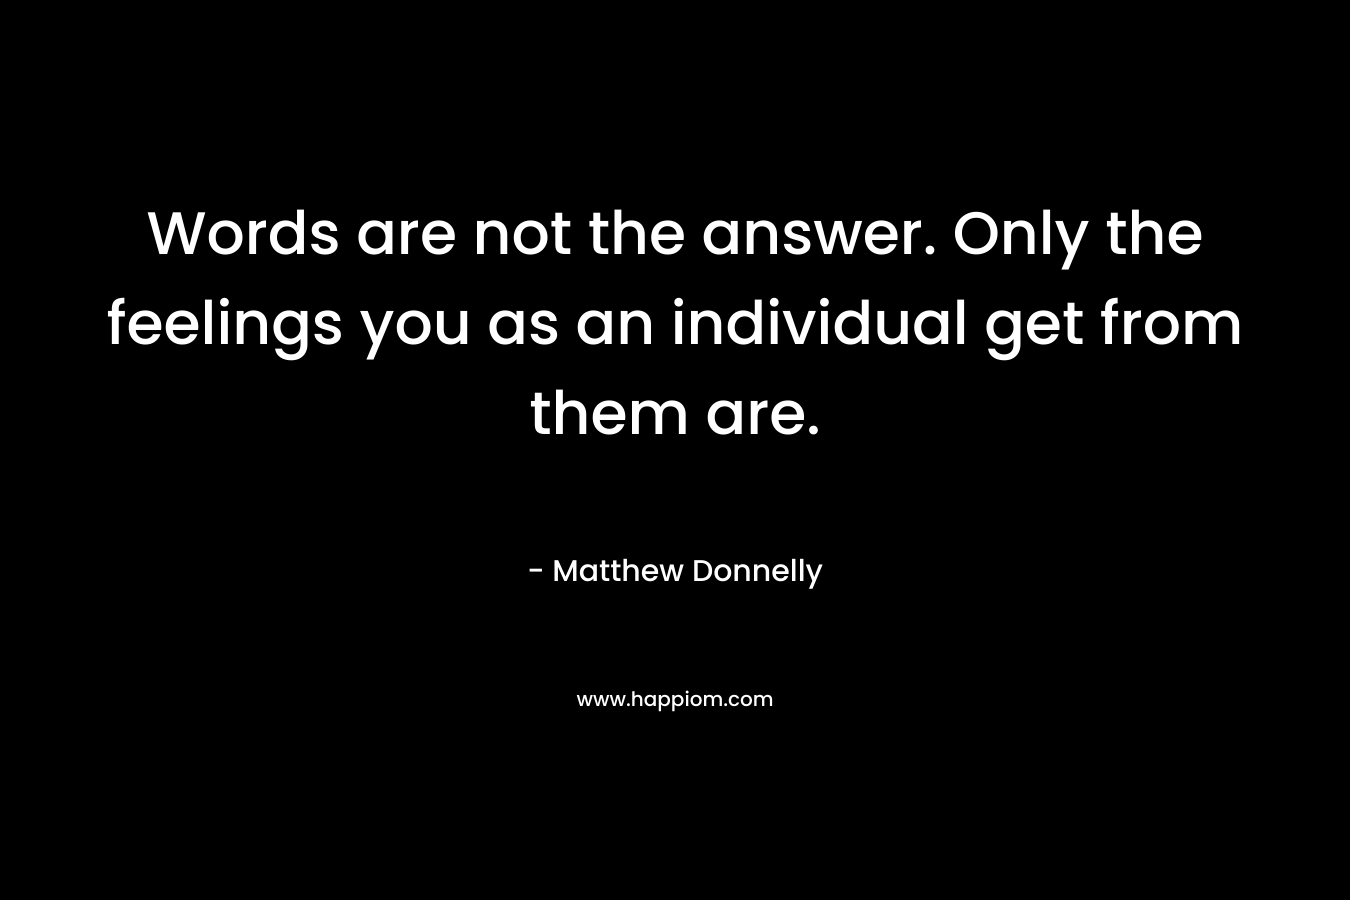 Words are not the answer. Only the feelings you as an individual get from them are. – Matthew Donnelly